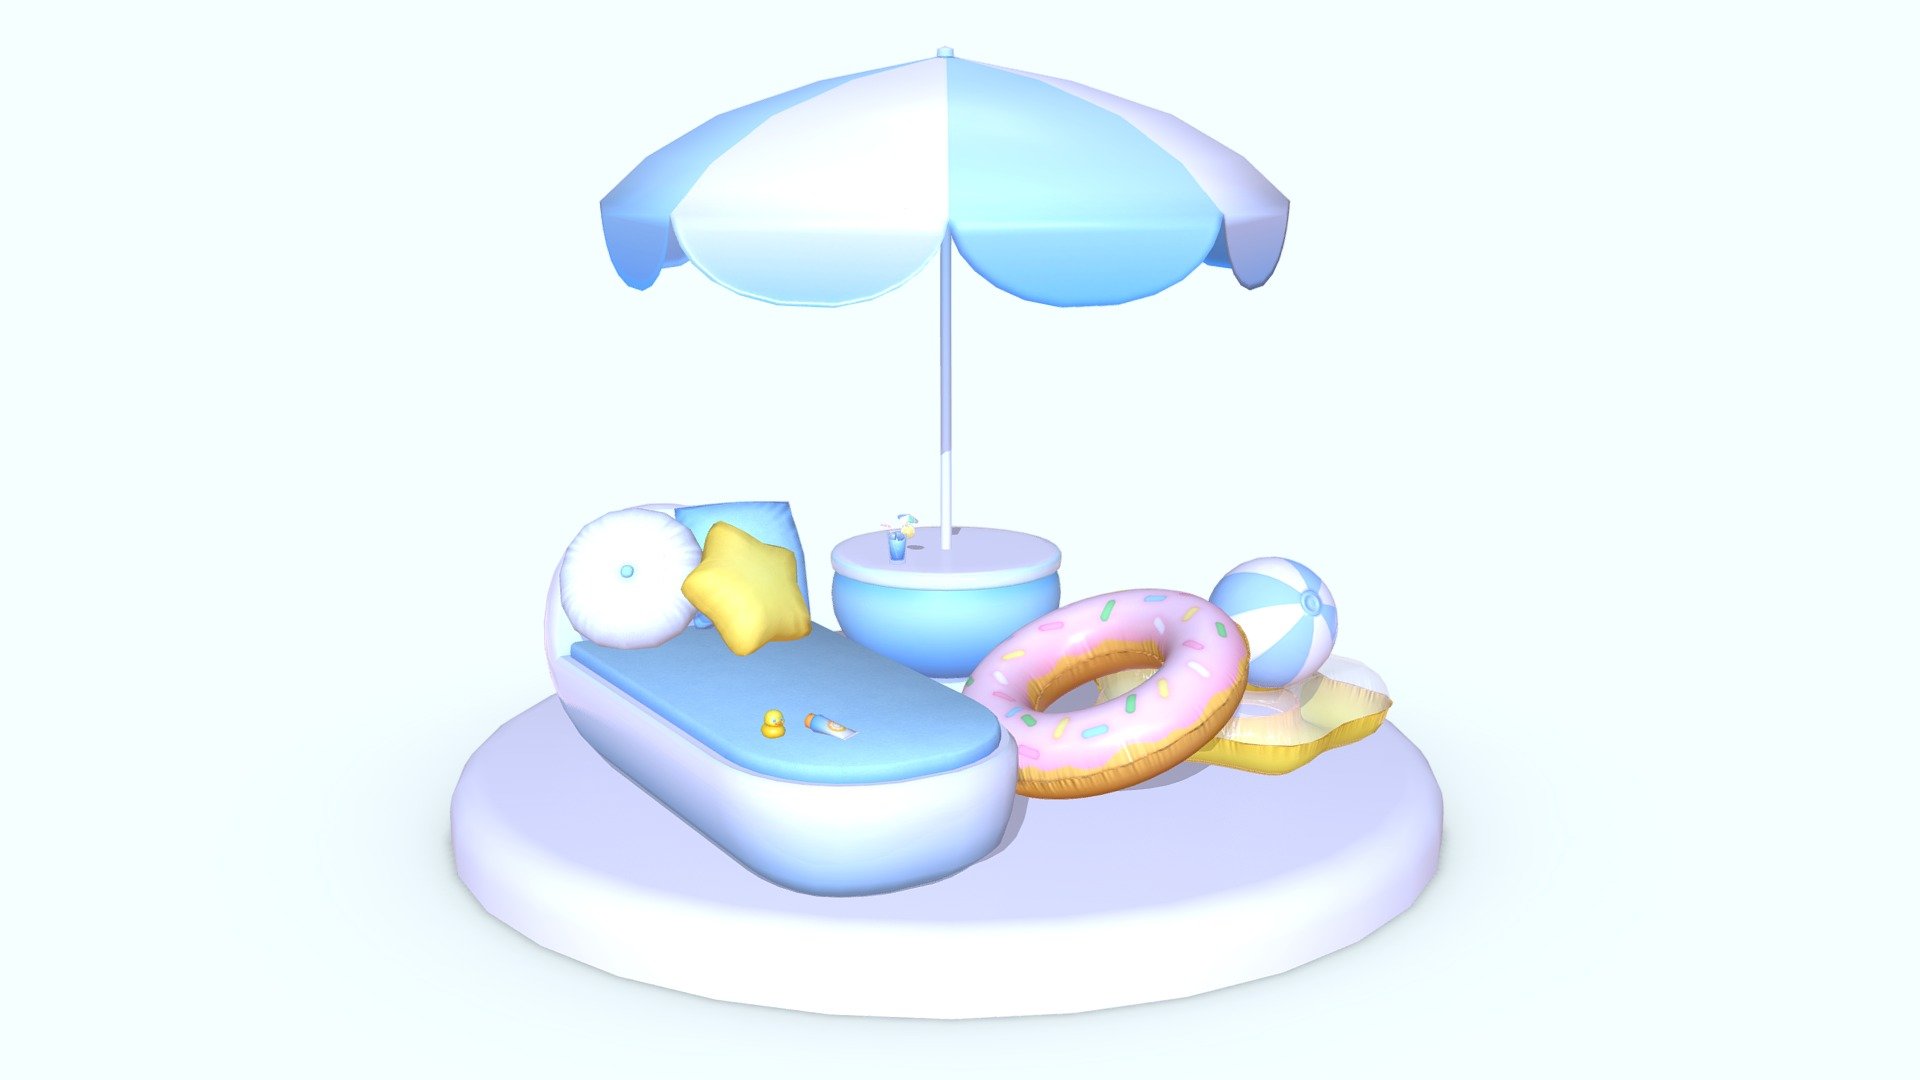 This is a Stylized Pool Set made as a prop package for VRChat containing 11 different models:
☁️Sunbed
☁️Parasol + Table
☁️Square Pillow
☁️Star Pillow
☁️Round Pillow
☁️Beach Ball
☁️Swim Ring (Regular)
☁️Swim Ring (Star)
☁️Sunscreen
☁️Rubberduck
☁️Drink

Because this model originally is made for VRChat, it uses PoiyomiToonShader V8.1.166, a free open-source shader intended for use with VRChat, but the showcase scene also includes UnityStandard as a backup. In order for the shader to work, you need to import it into your project first.

It comes with two different colorways:


Upon purchase you will recieve a zip folder containing:
• 1 Unity Package
• 12 fbx
• 22 Textures (2 Colorways with Base Color, Normal, Roughness, Opacity)
• Important Links
• Information Text

The Unity Package contains:
• Showcase scene with 3 different shaders (PoiyomiRealistic, PoiyomiToon, UnityStandard), in 2 colors
• Models
• Prefabs
• Textures
• Materials - Stylized Pool Set - Buy Royalty Free 3D model by icebell 3d model